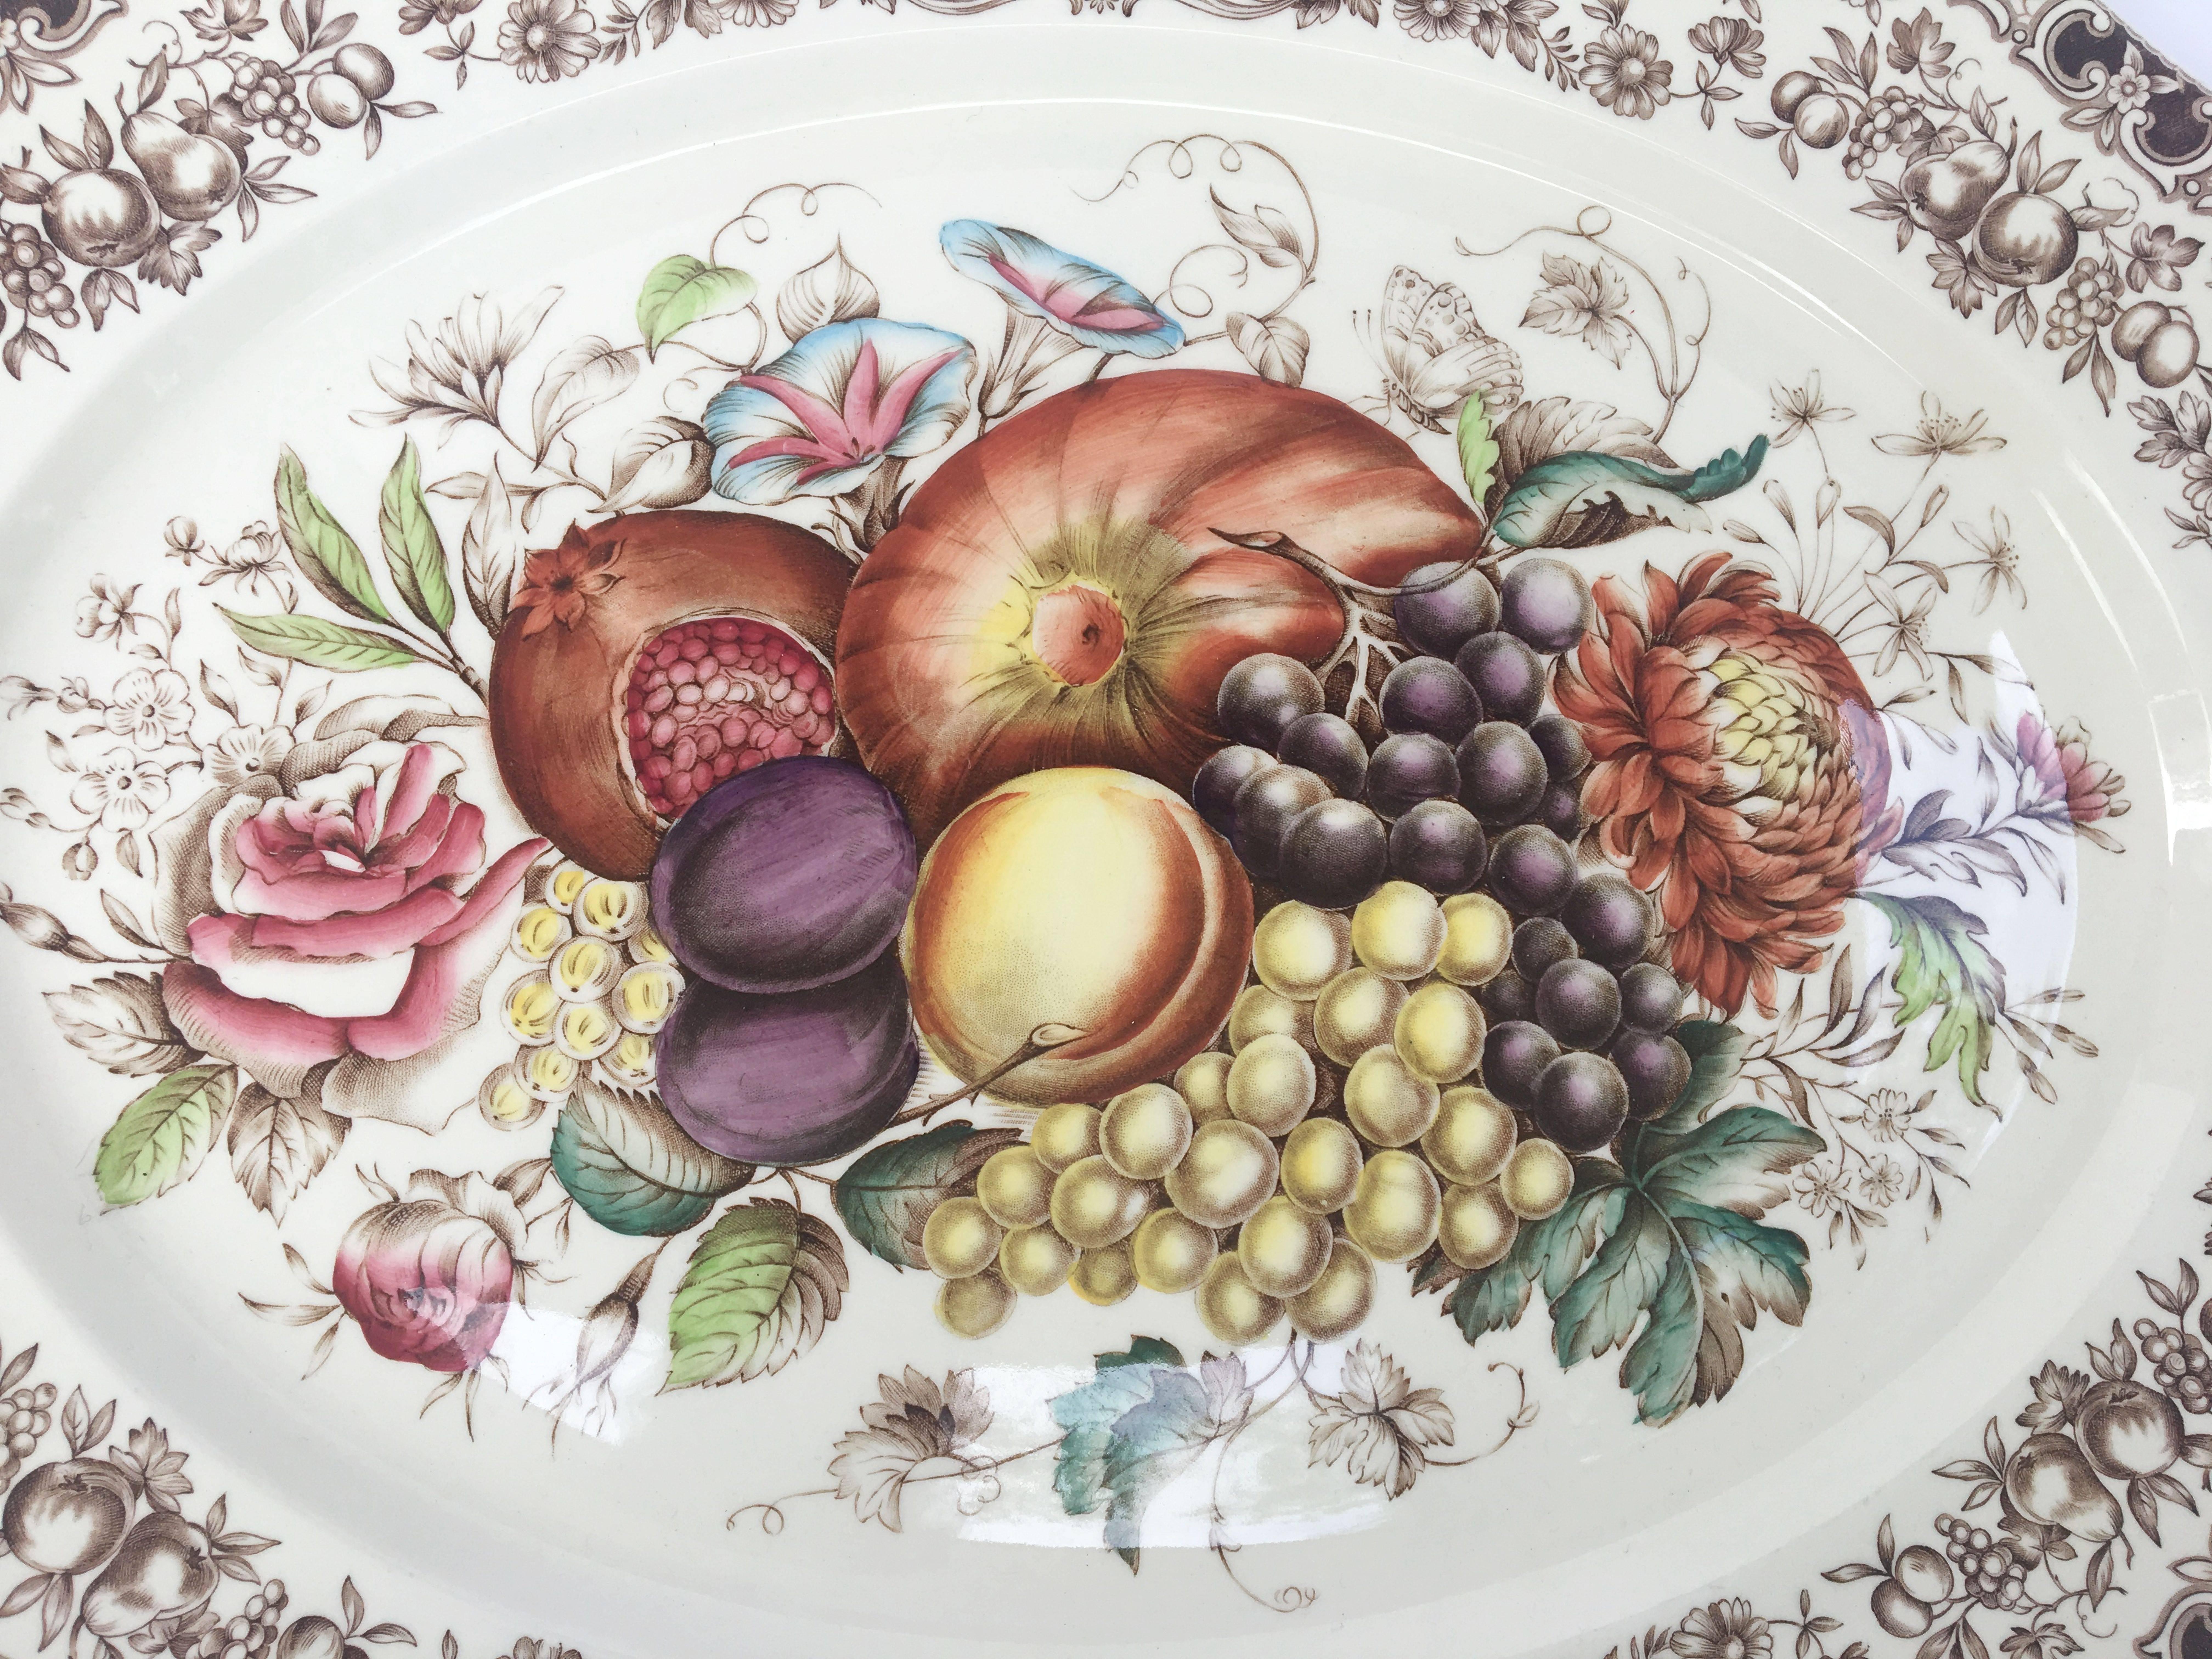 A large vintage serving platter featuring the harvest fruit brown and white transfer-ware pattern by the celebrated English pottery firm, Johnson Brothers.

With authentic midcentury brown label on reverse.

Perfect for the holidays or for